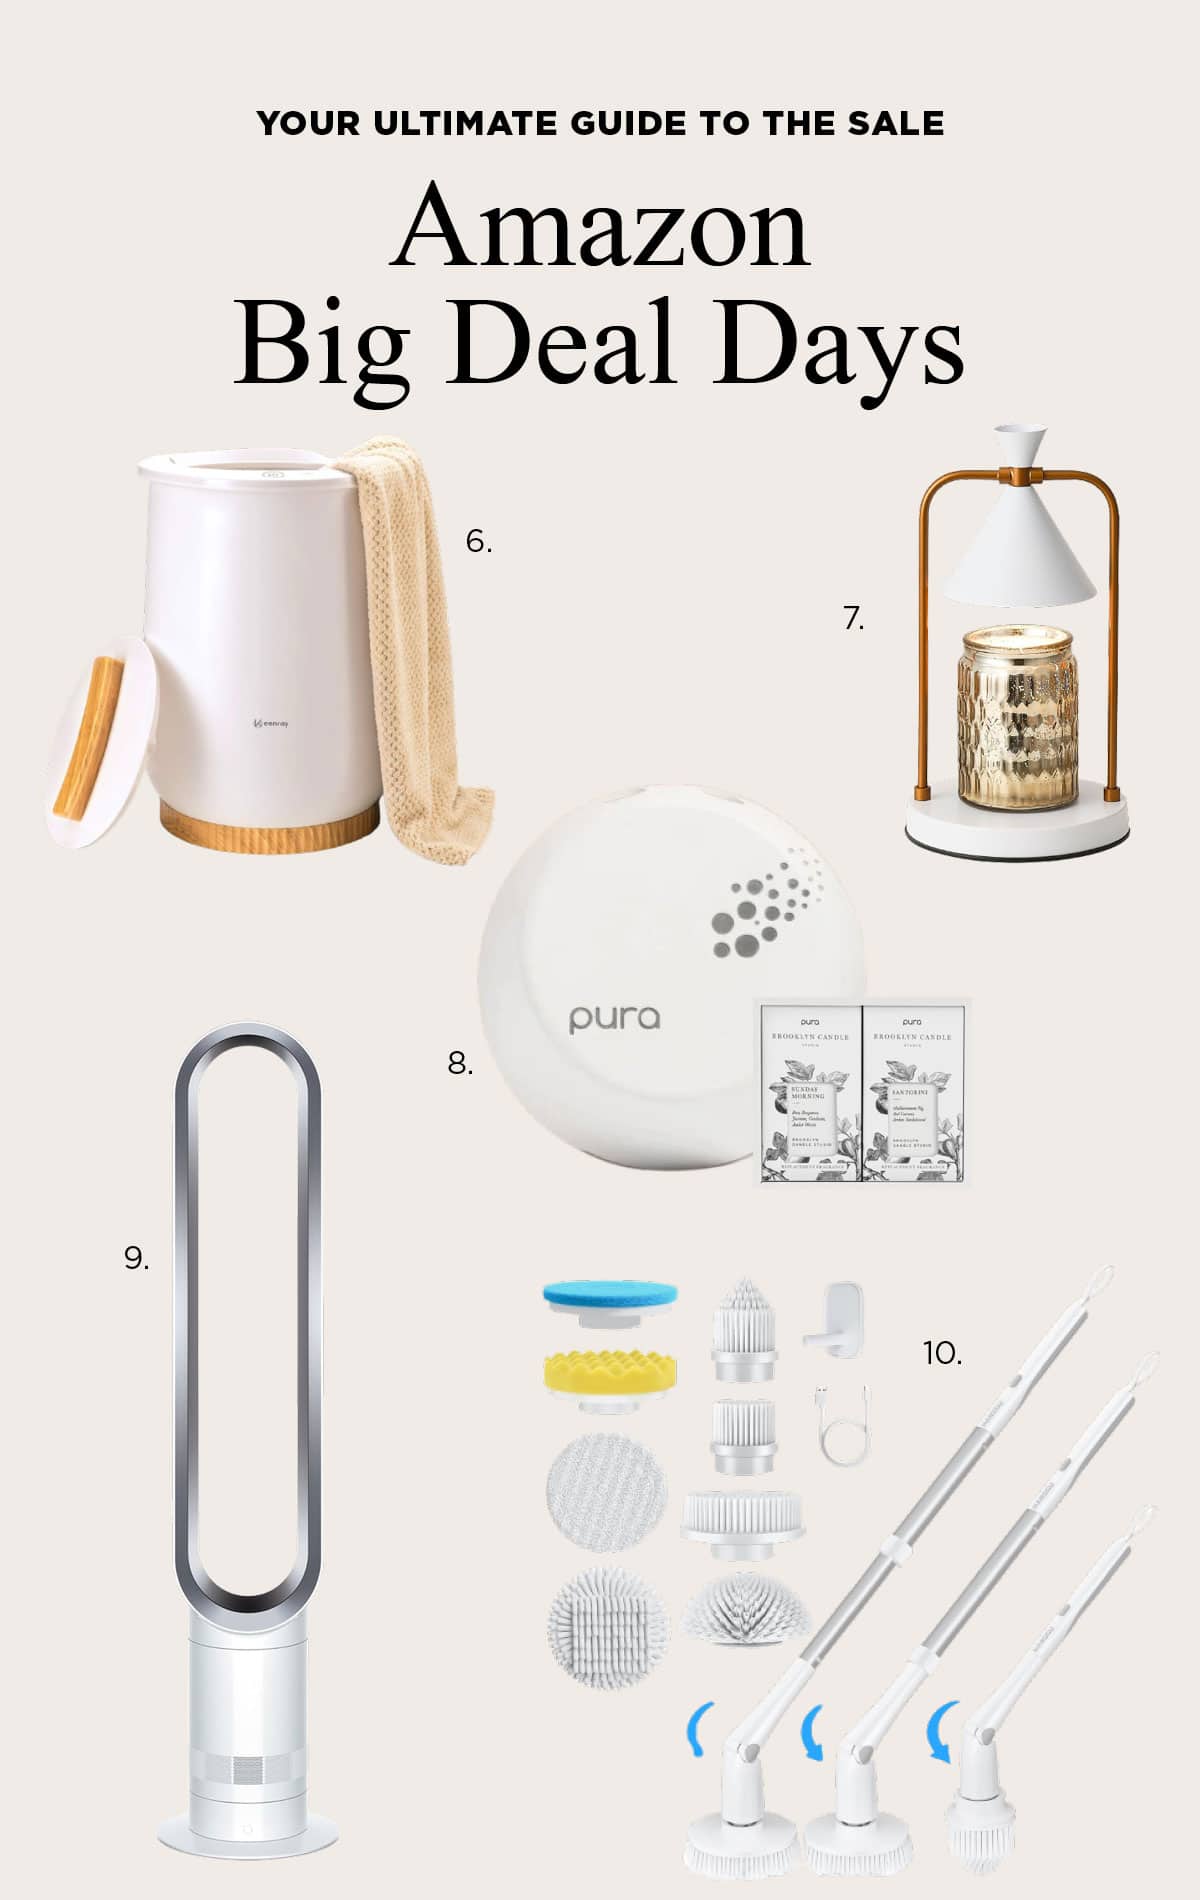 The Top-Selling Items for  Prime Big Deal Days 2023